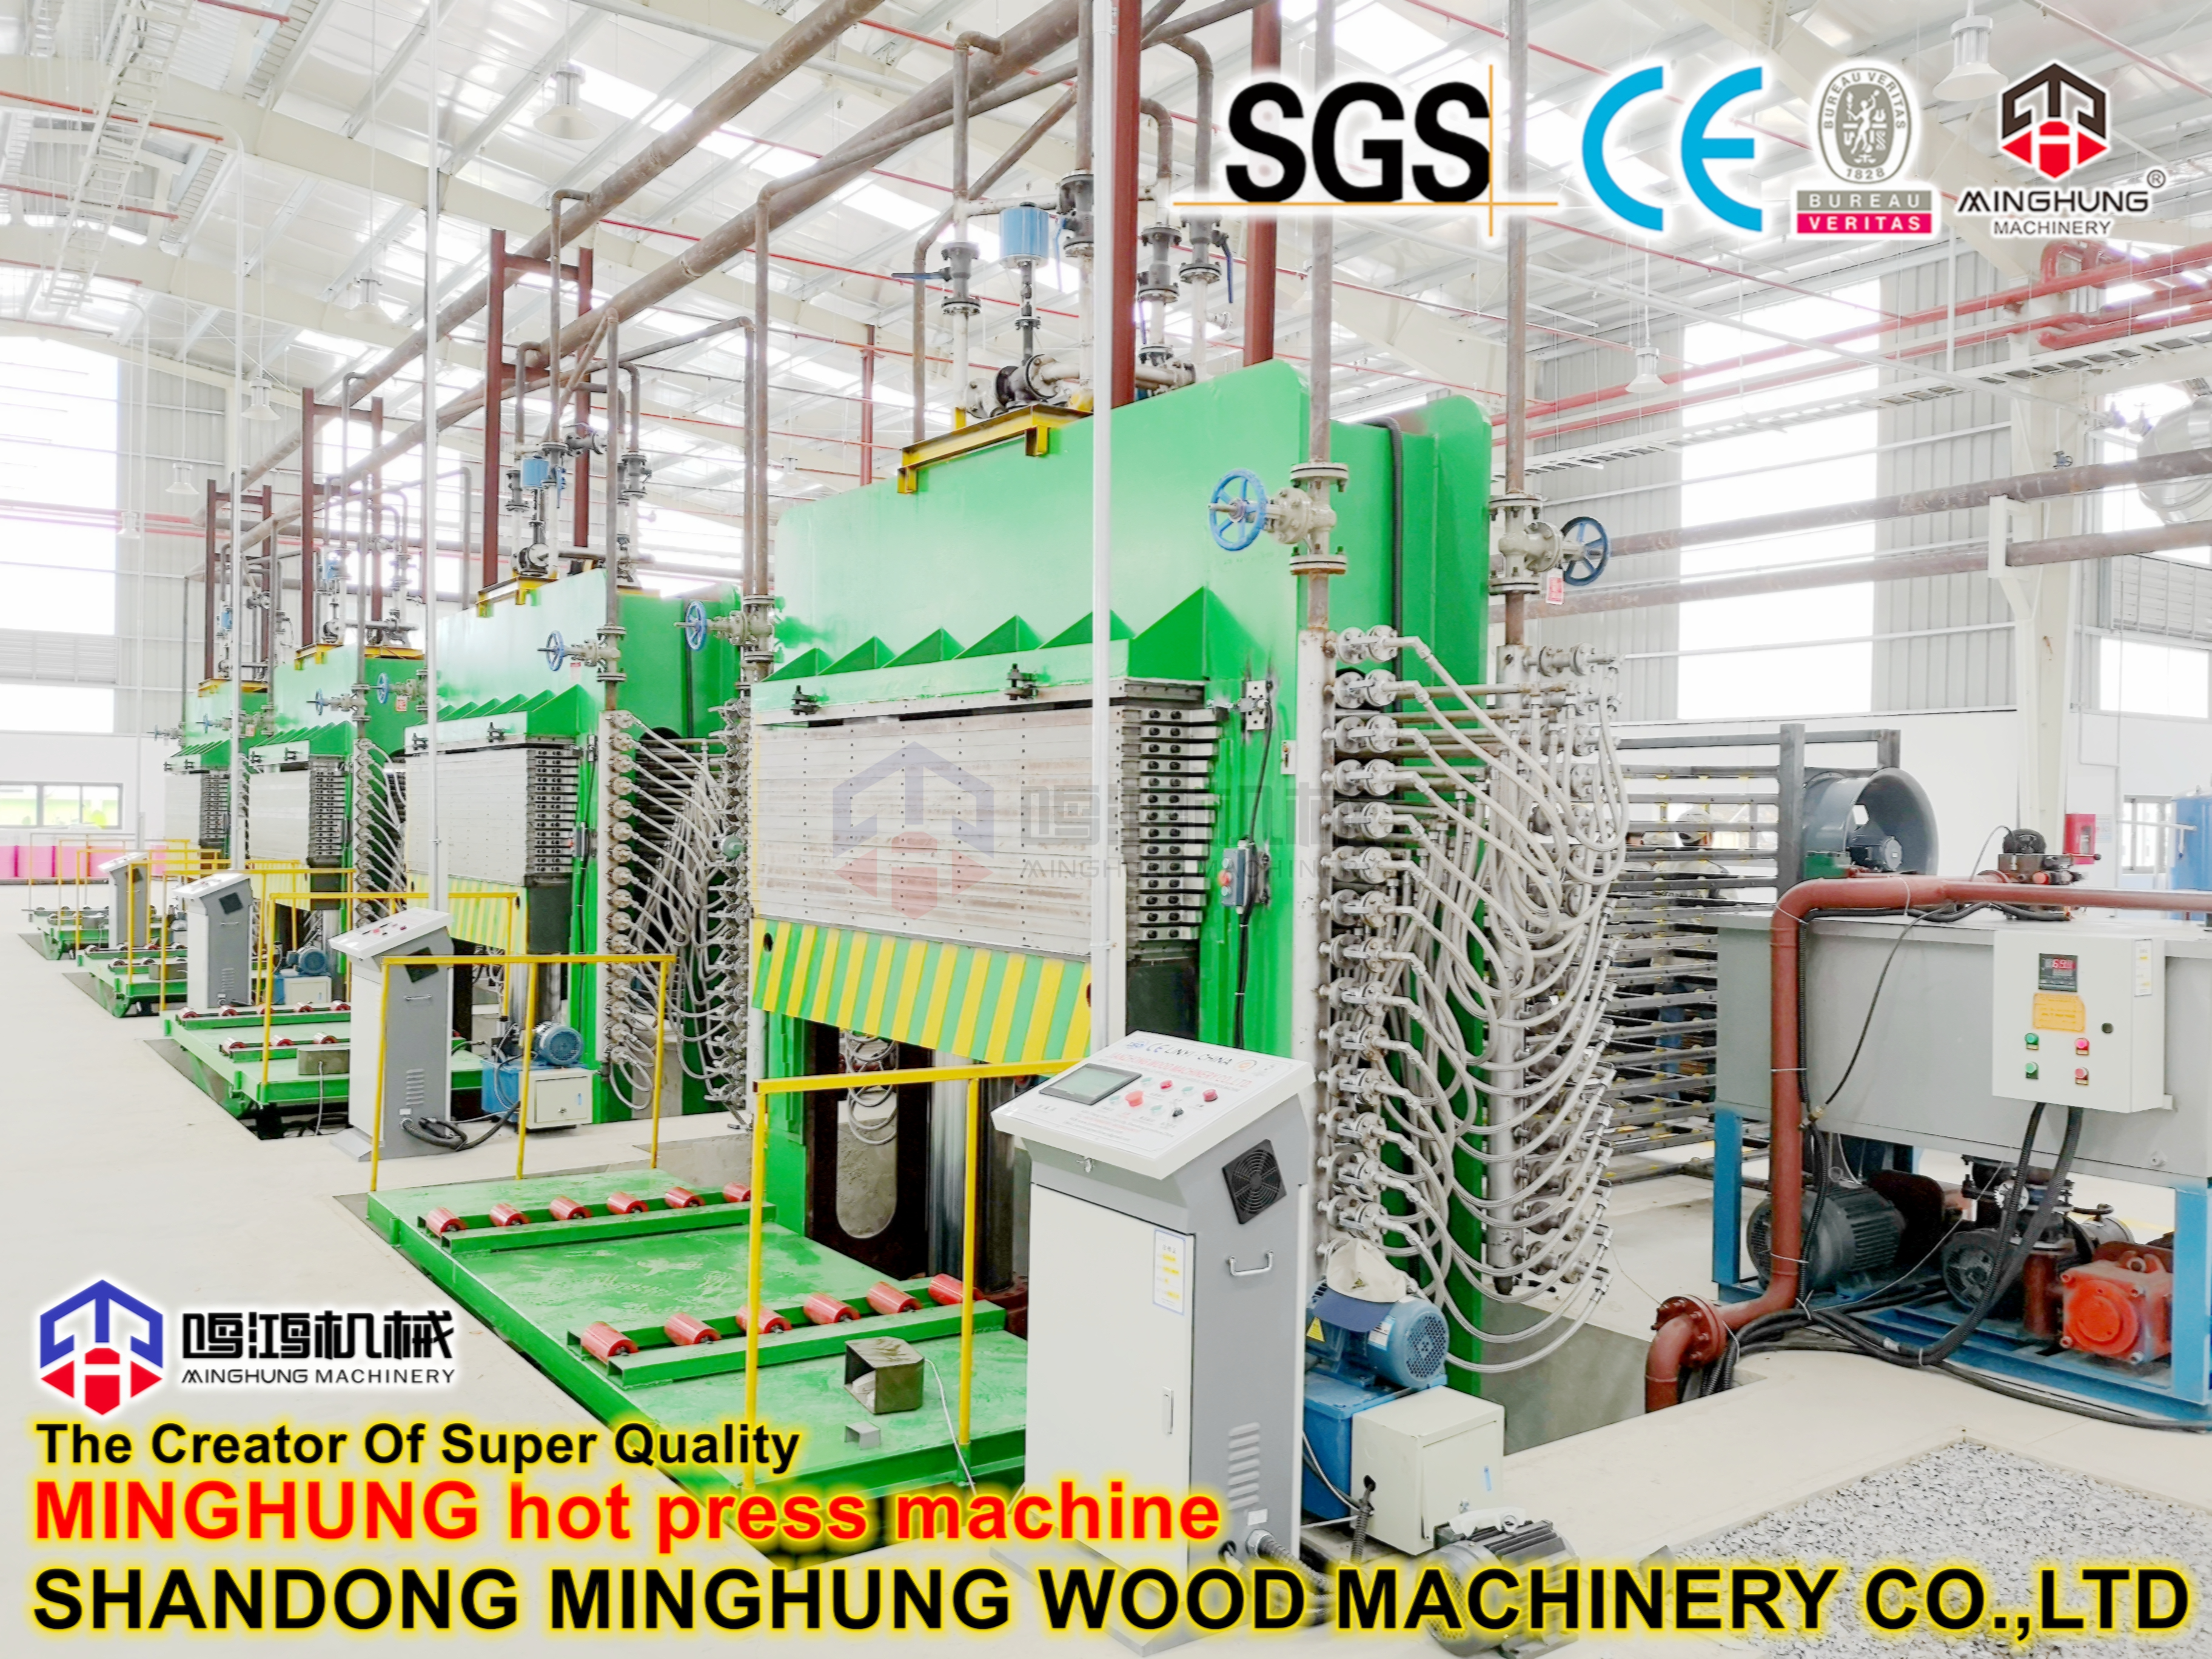 Plywood Manufacturing Process in China Factory